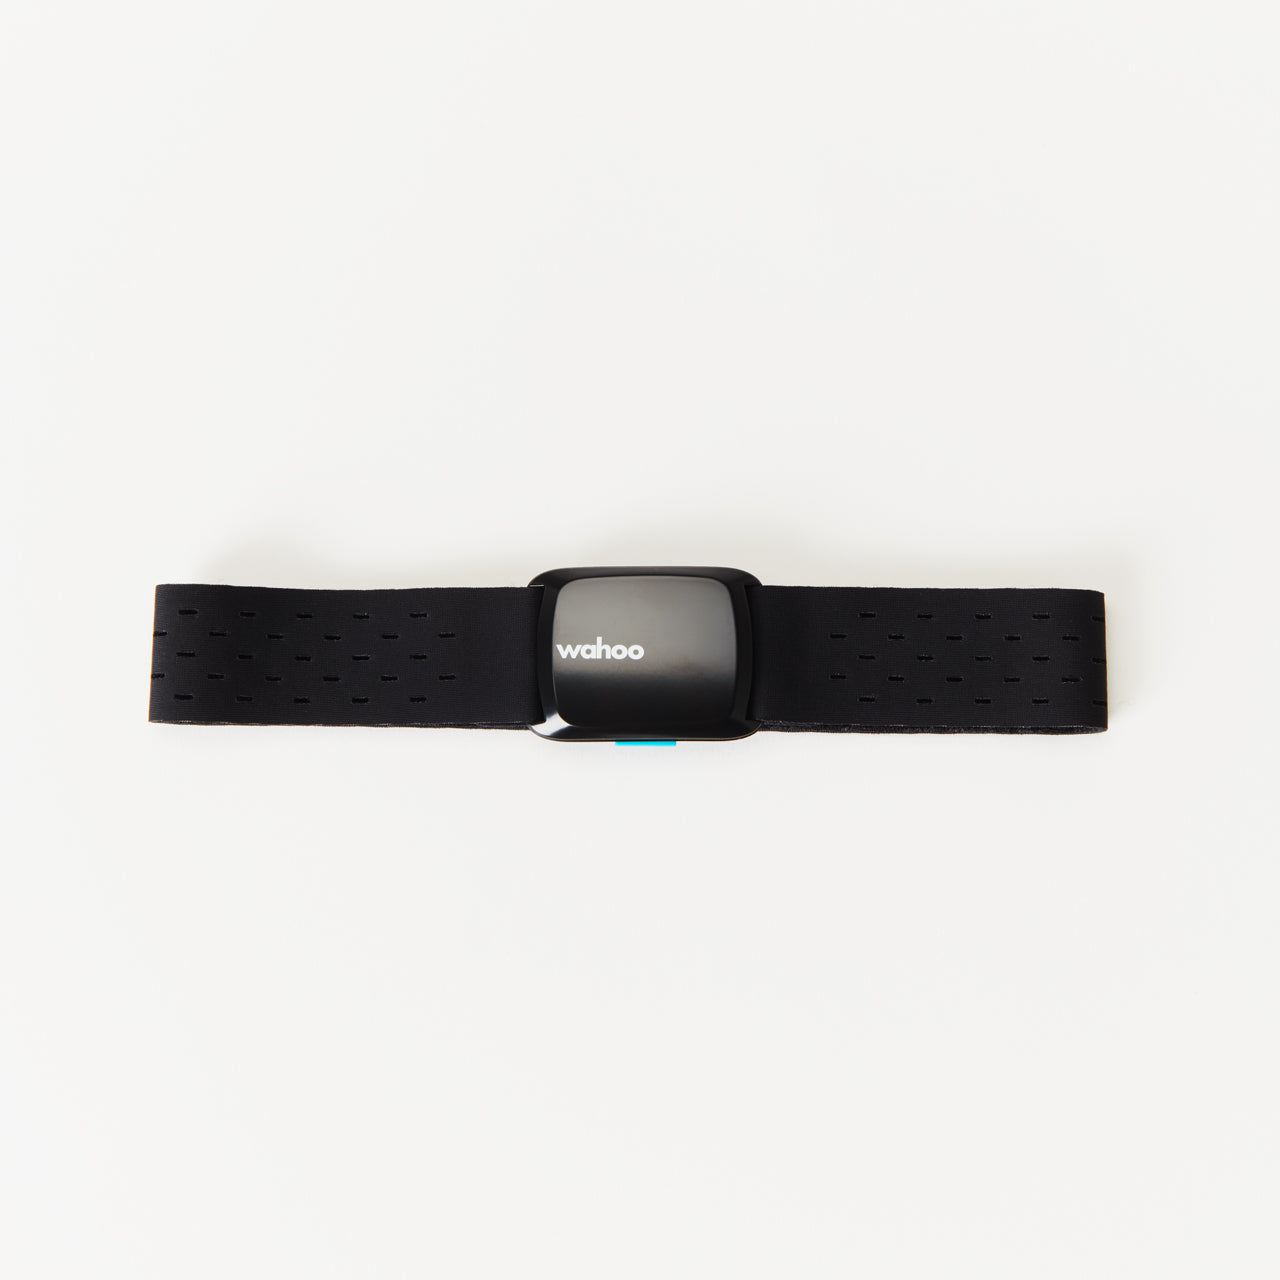 Wahoo TICKR Fit Heart Rate Armband